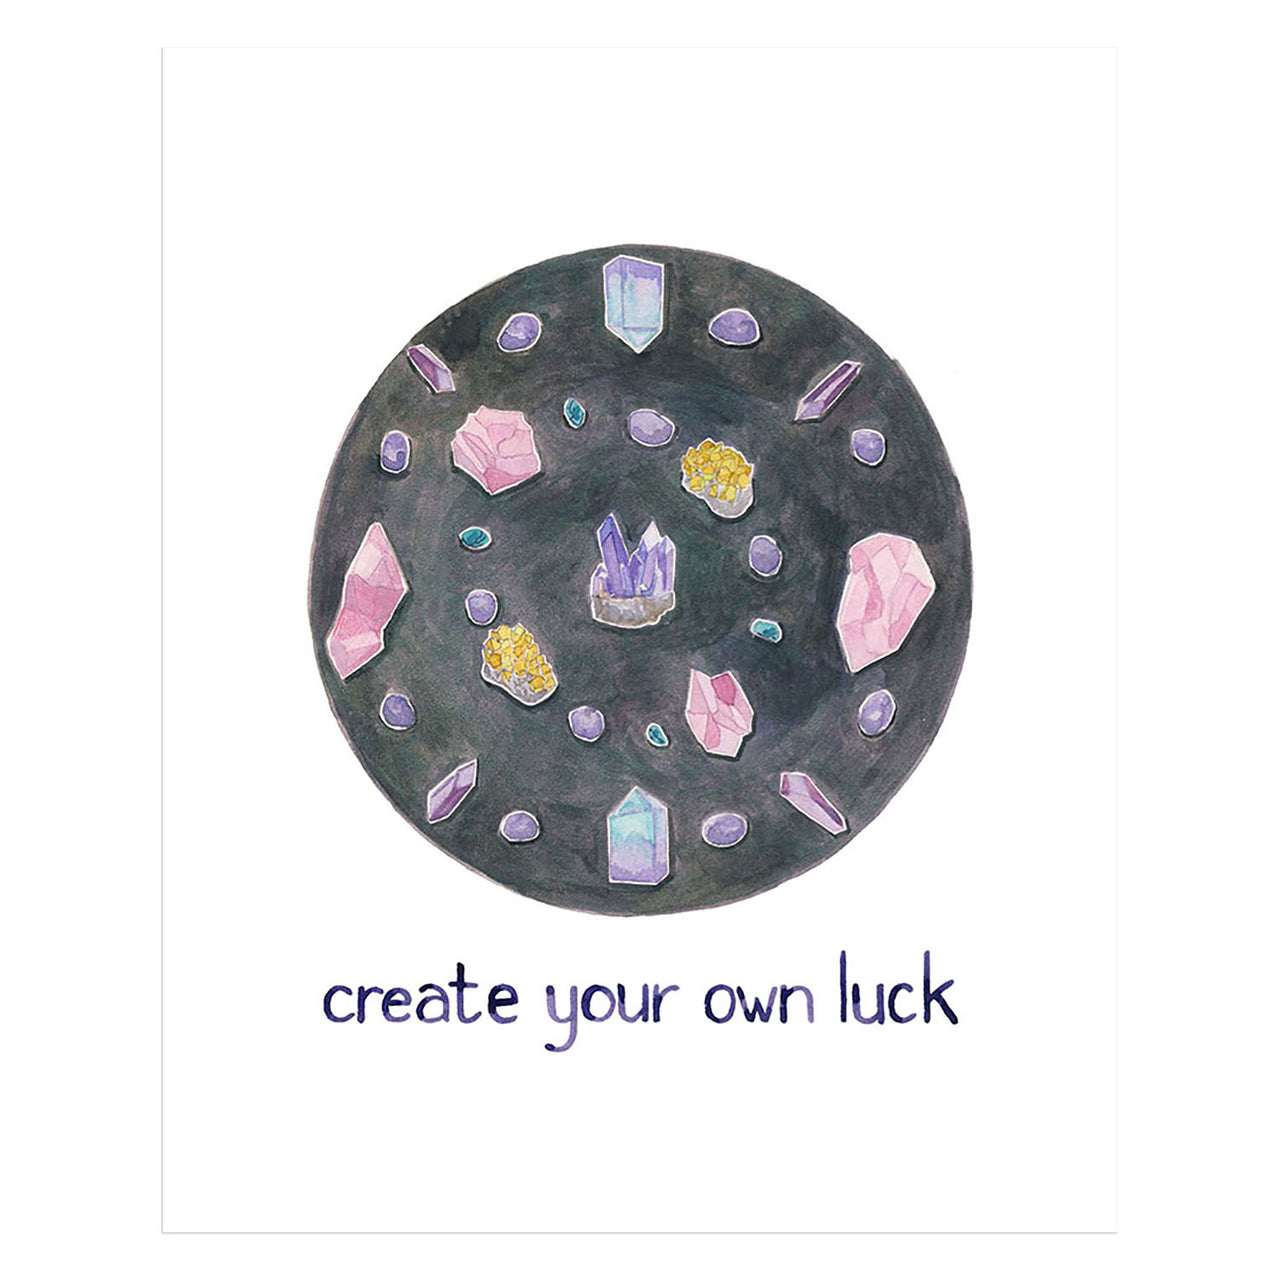 Create your own luck with crystal grid original watercolor painting by Yardia